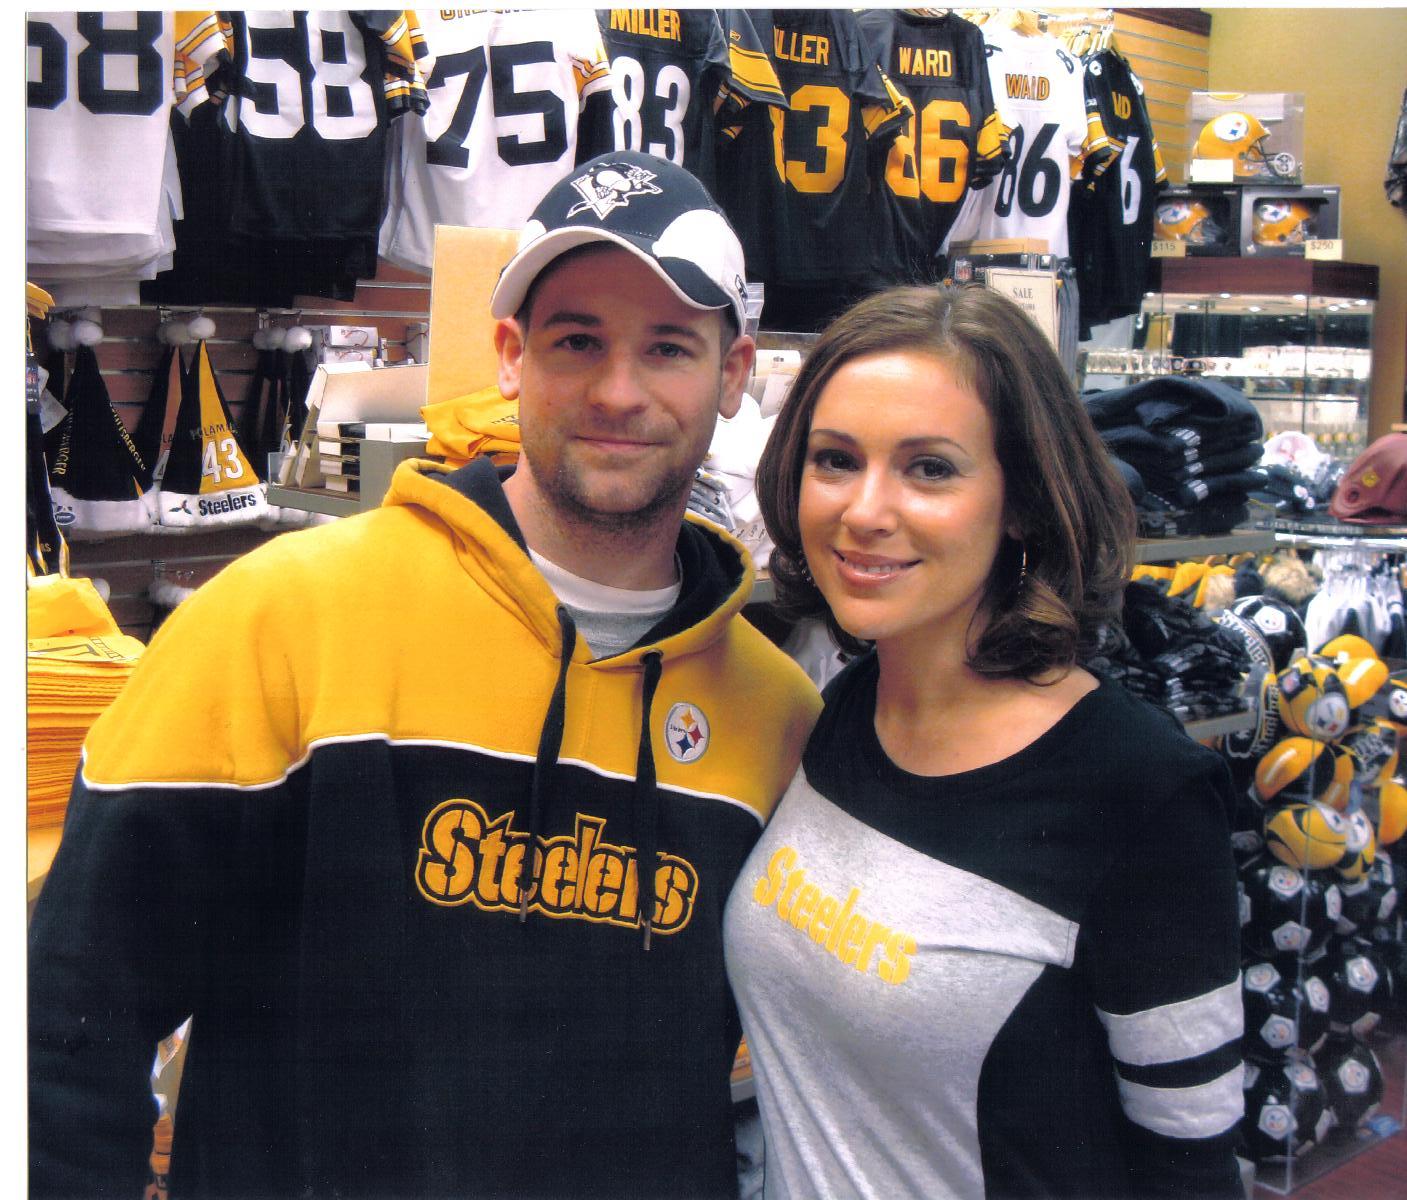 James Quinn & Alyssa Milano pose for a pic at one of Alyssa's clothing line appearances in Pgh